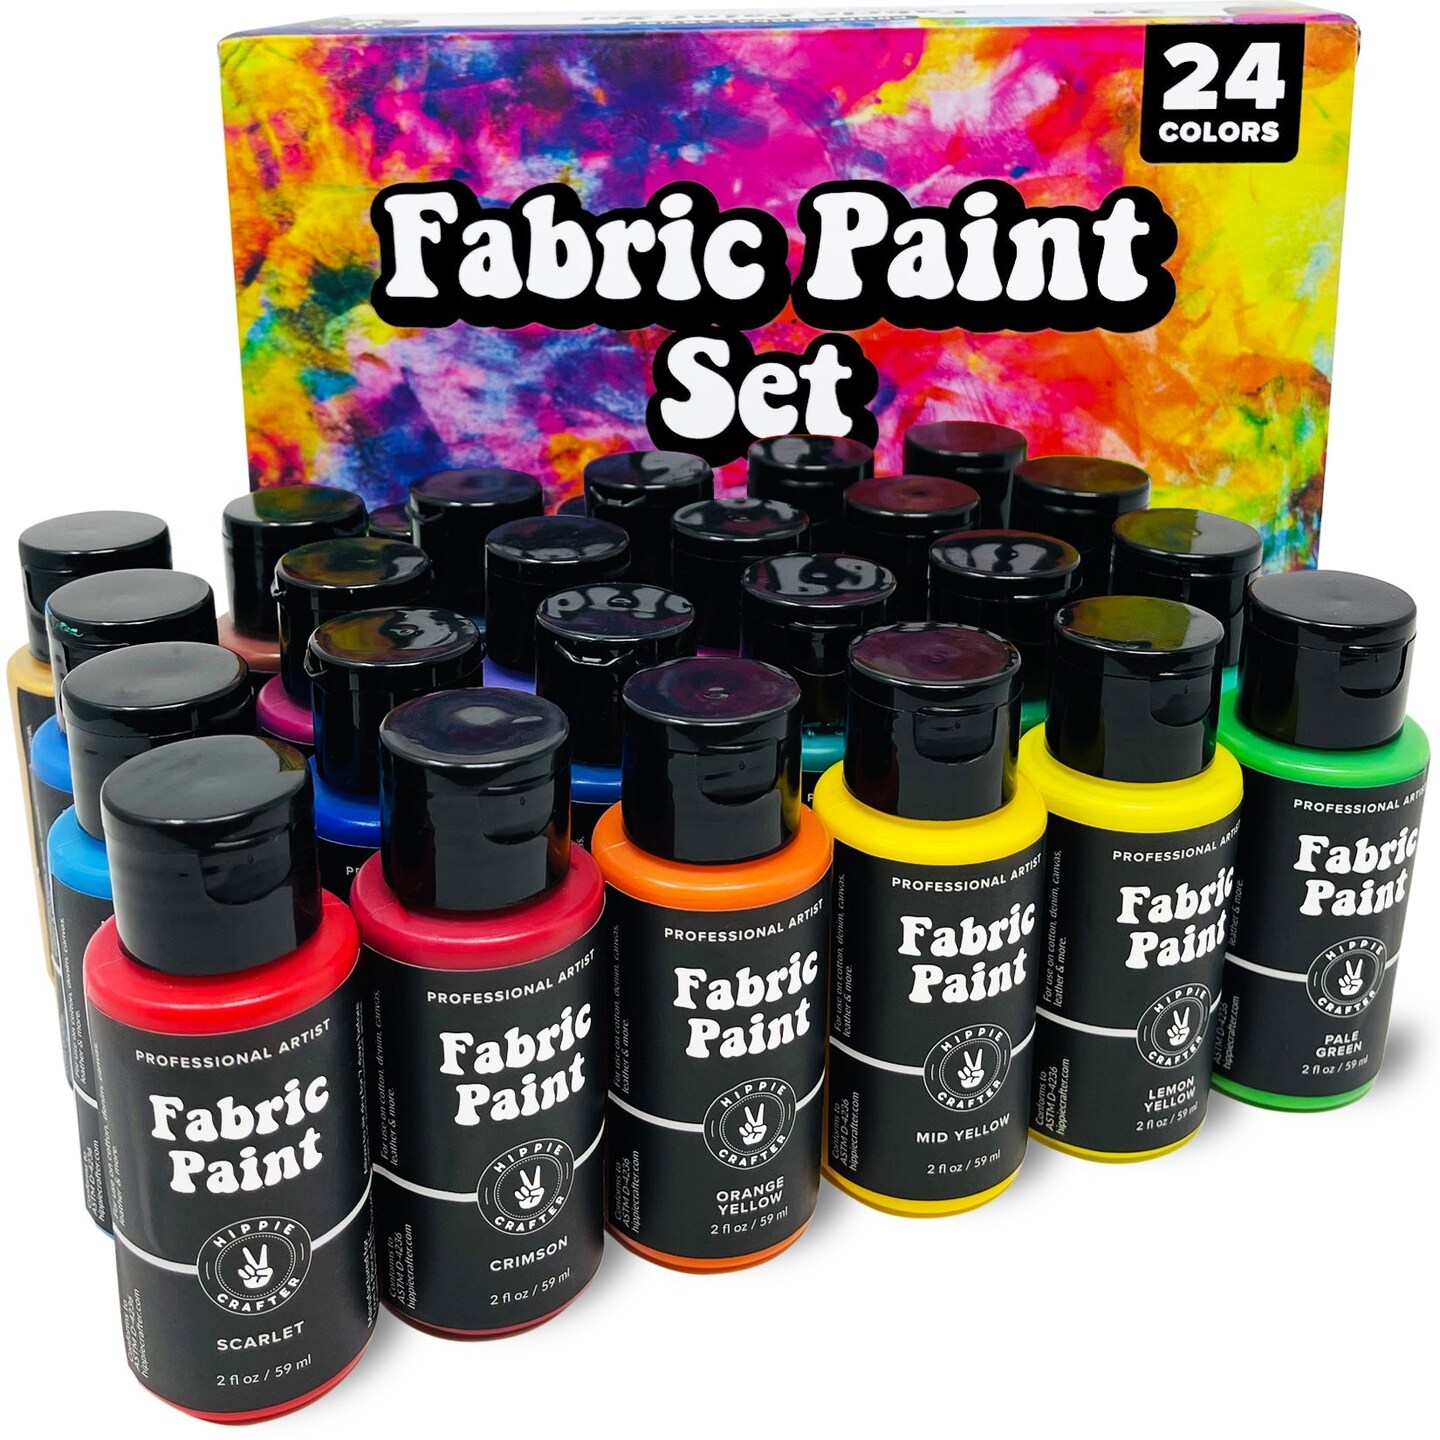  Permanent Fabric Paint for Clothes 24 Colors Bulk Kit for  Upholstery Outdoor Cushions Shoe Paint Decorating Medium Acrylic Set  Metallic Gold, White, Red, Yellow, Orange Pink : Arts, Crafts & Sewing